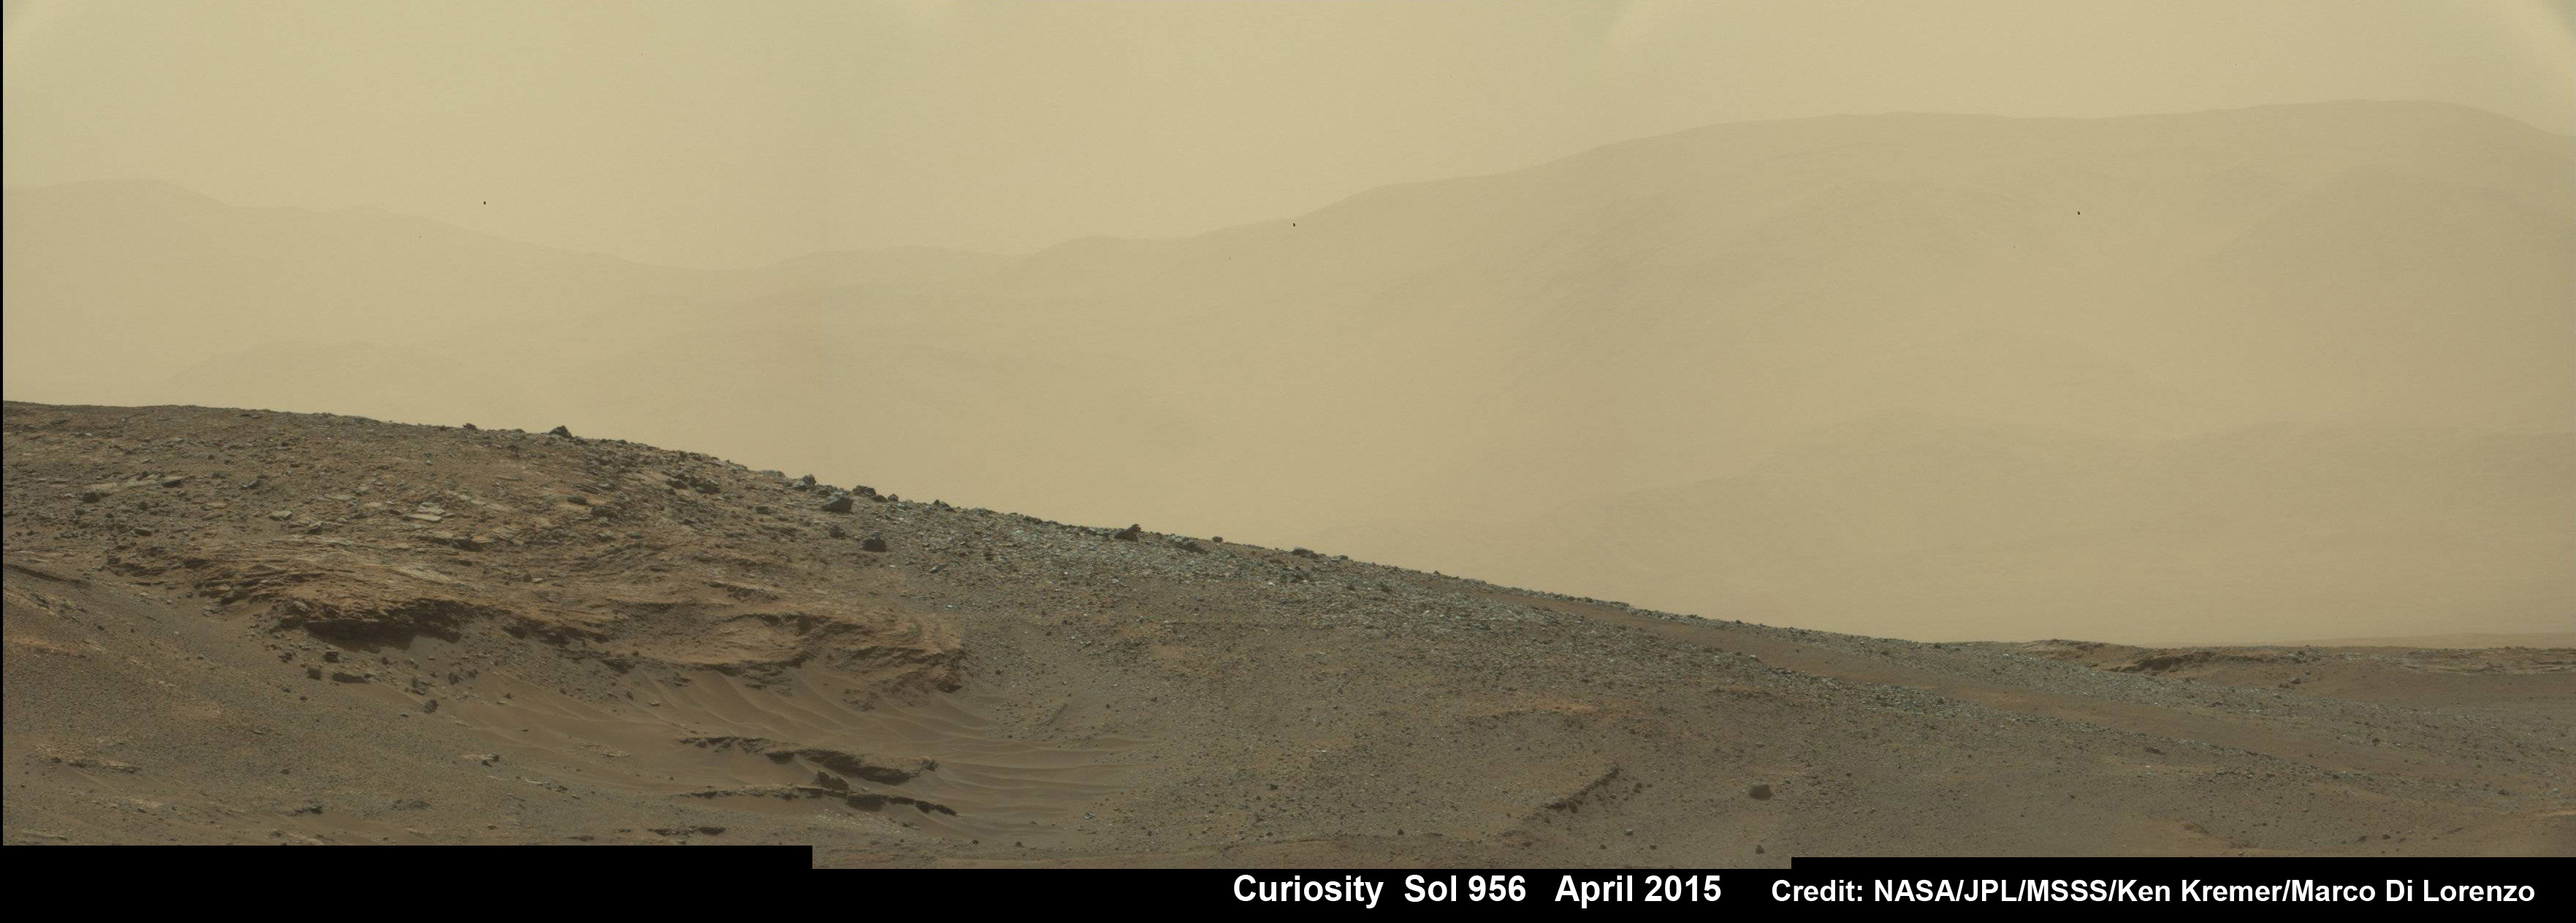 NASA's Curiosity Mars rover recorded this matching daylight view from the same Martian landscape on the same sol as the sunset view taken at the close of the mission's 956th Martian day, or sol (April 15, 2015), from the rover's location in Gale Crater. Credit: NASA/JPL/MSSS/Ken Kremer/kenkremer.com/Marco Di Lorenzo 